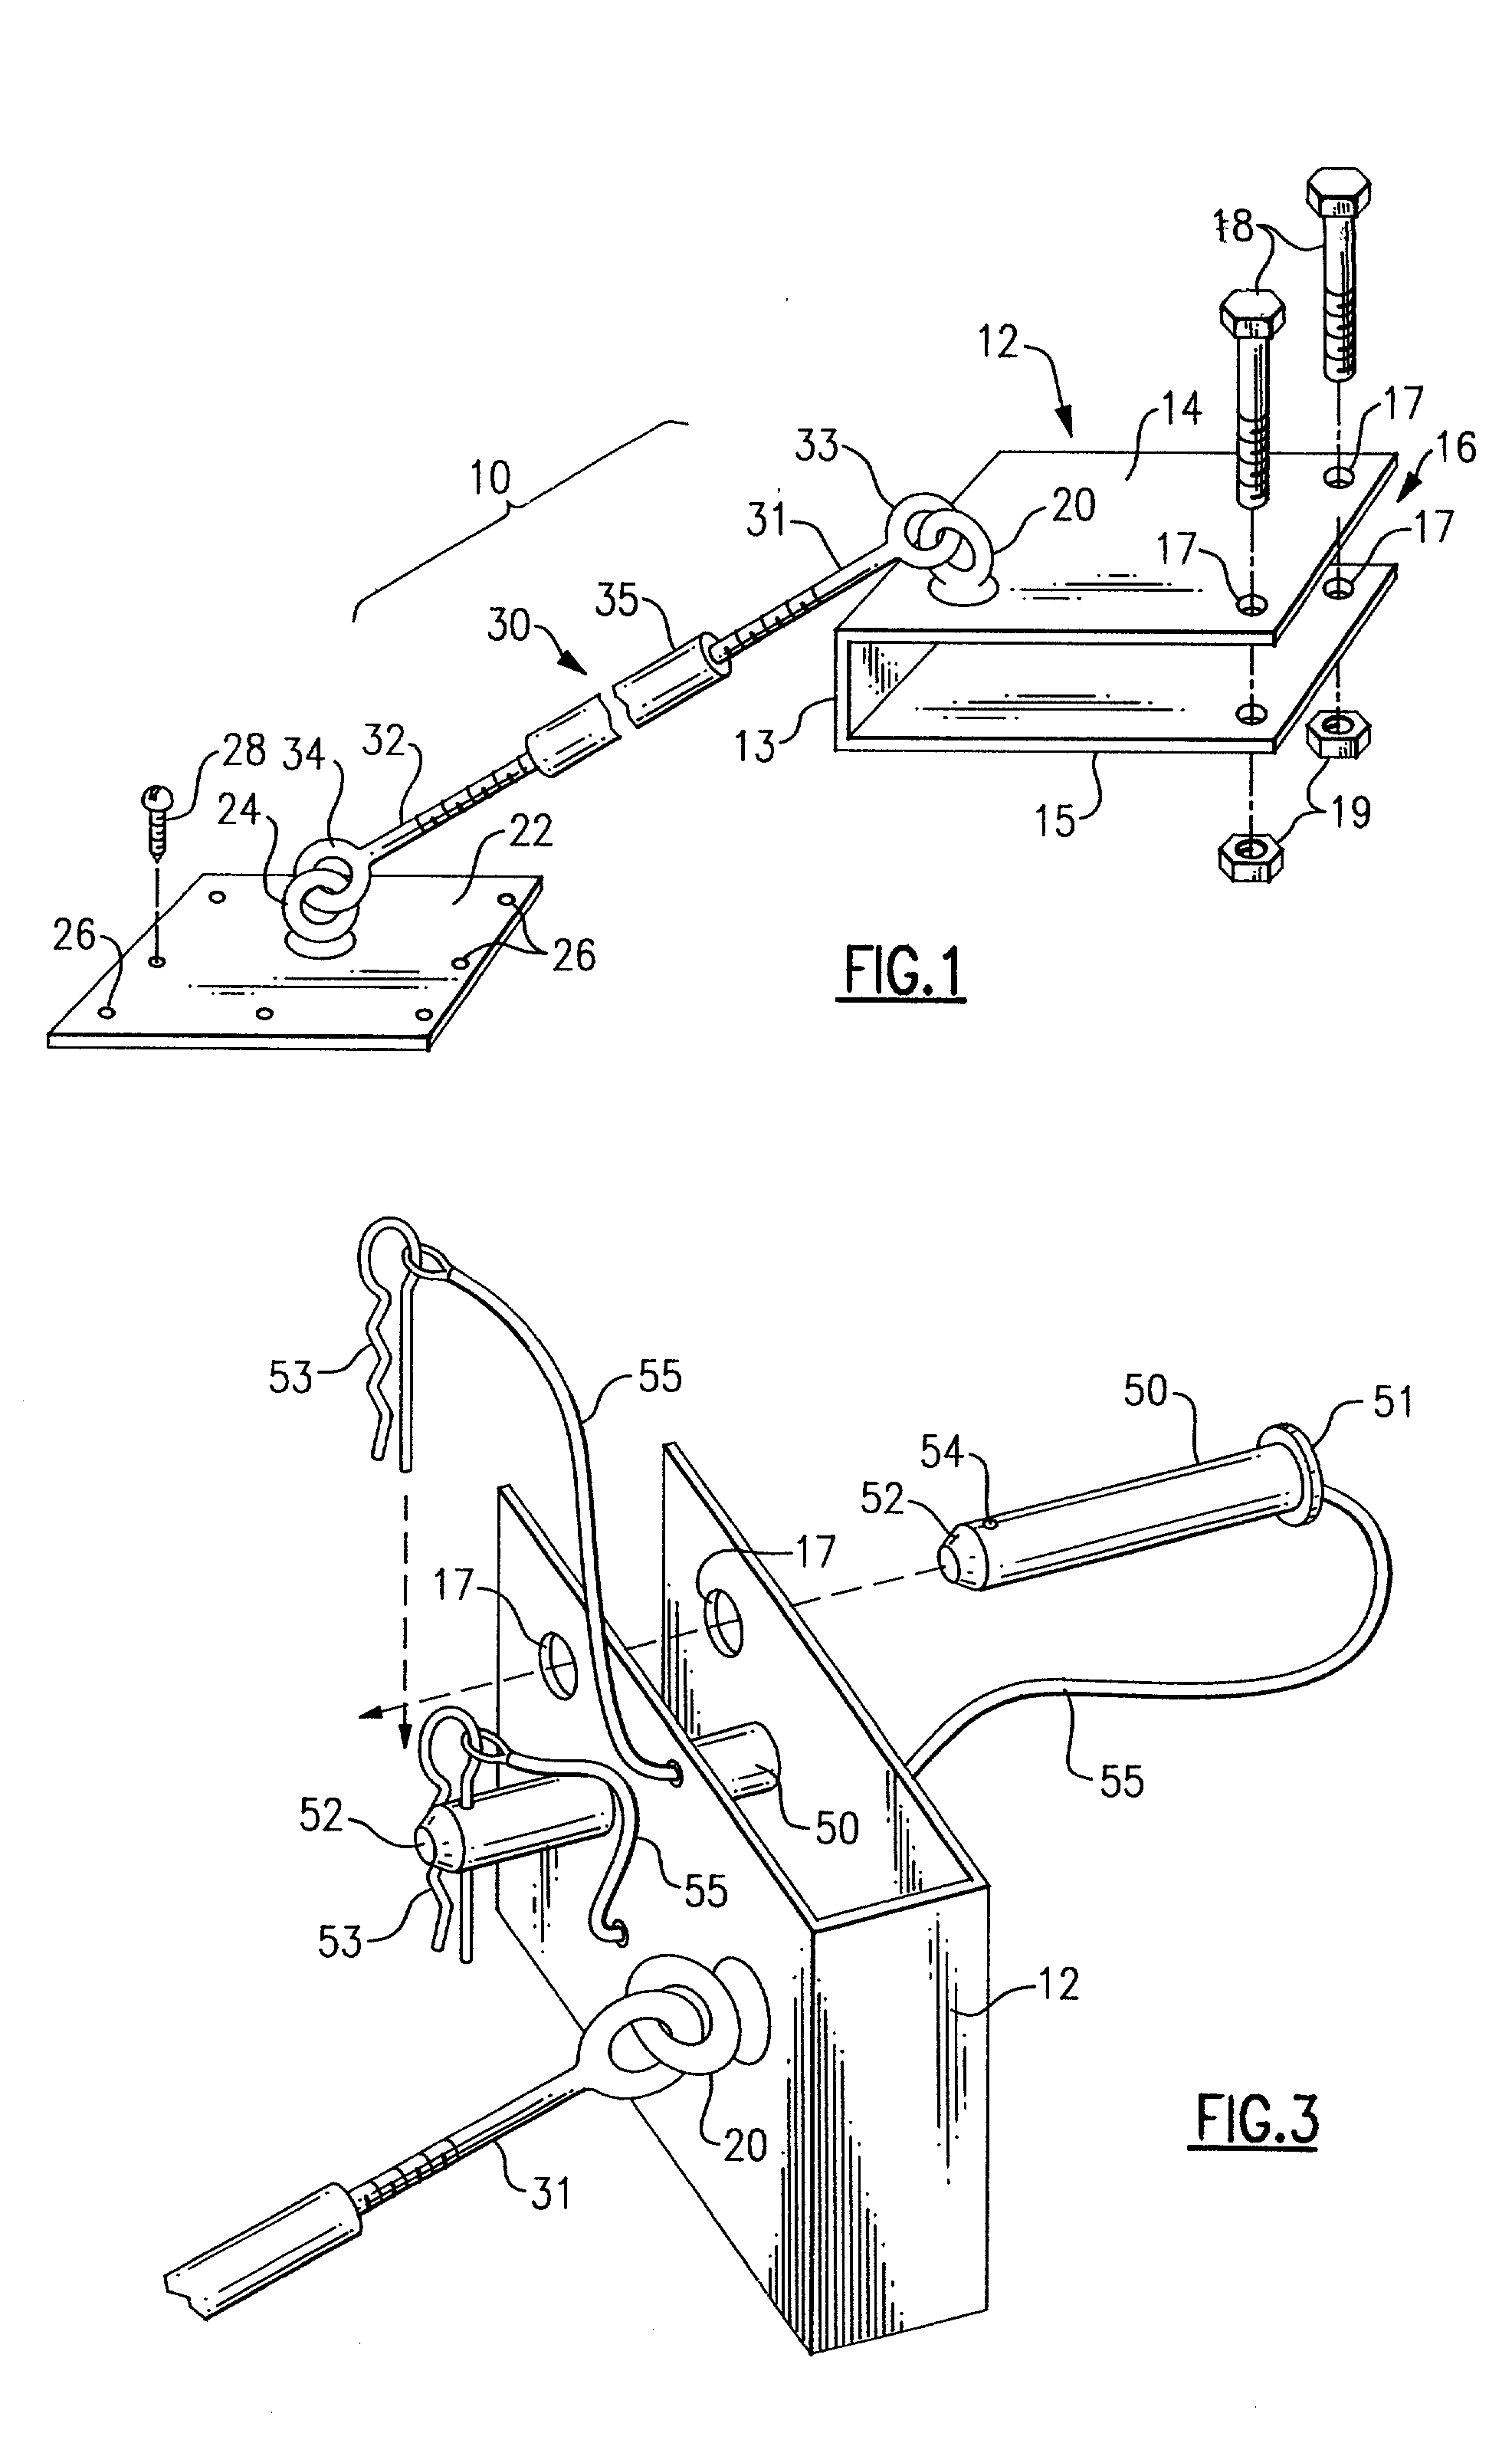 Apparatus for securing ladder to building structure